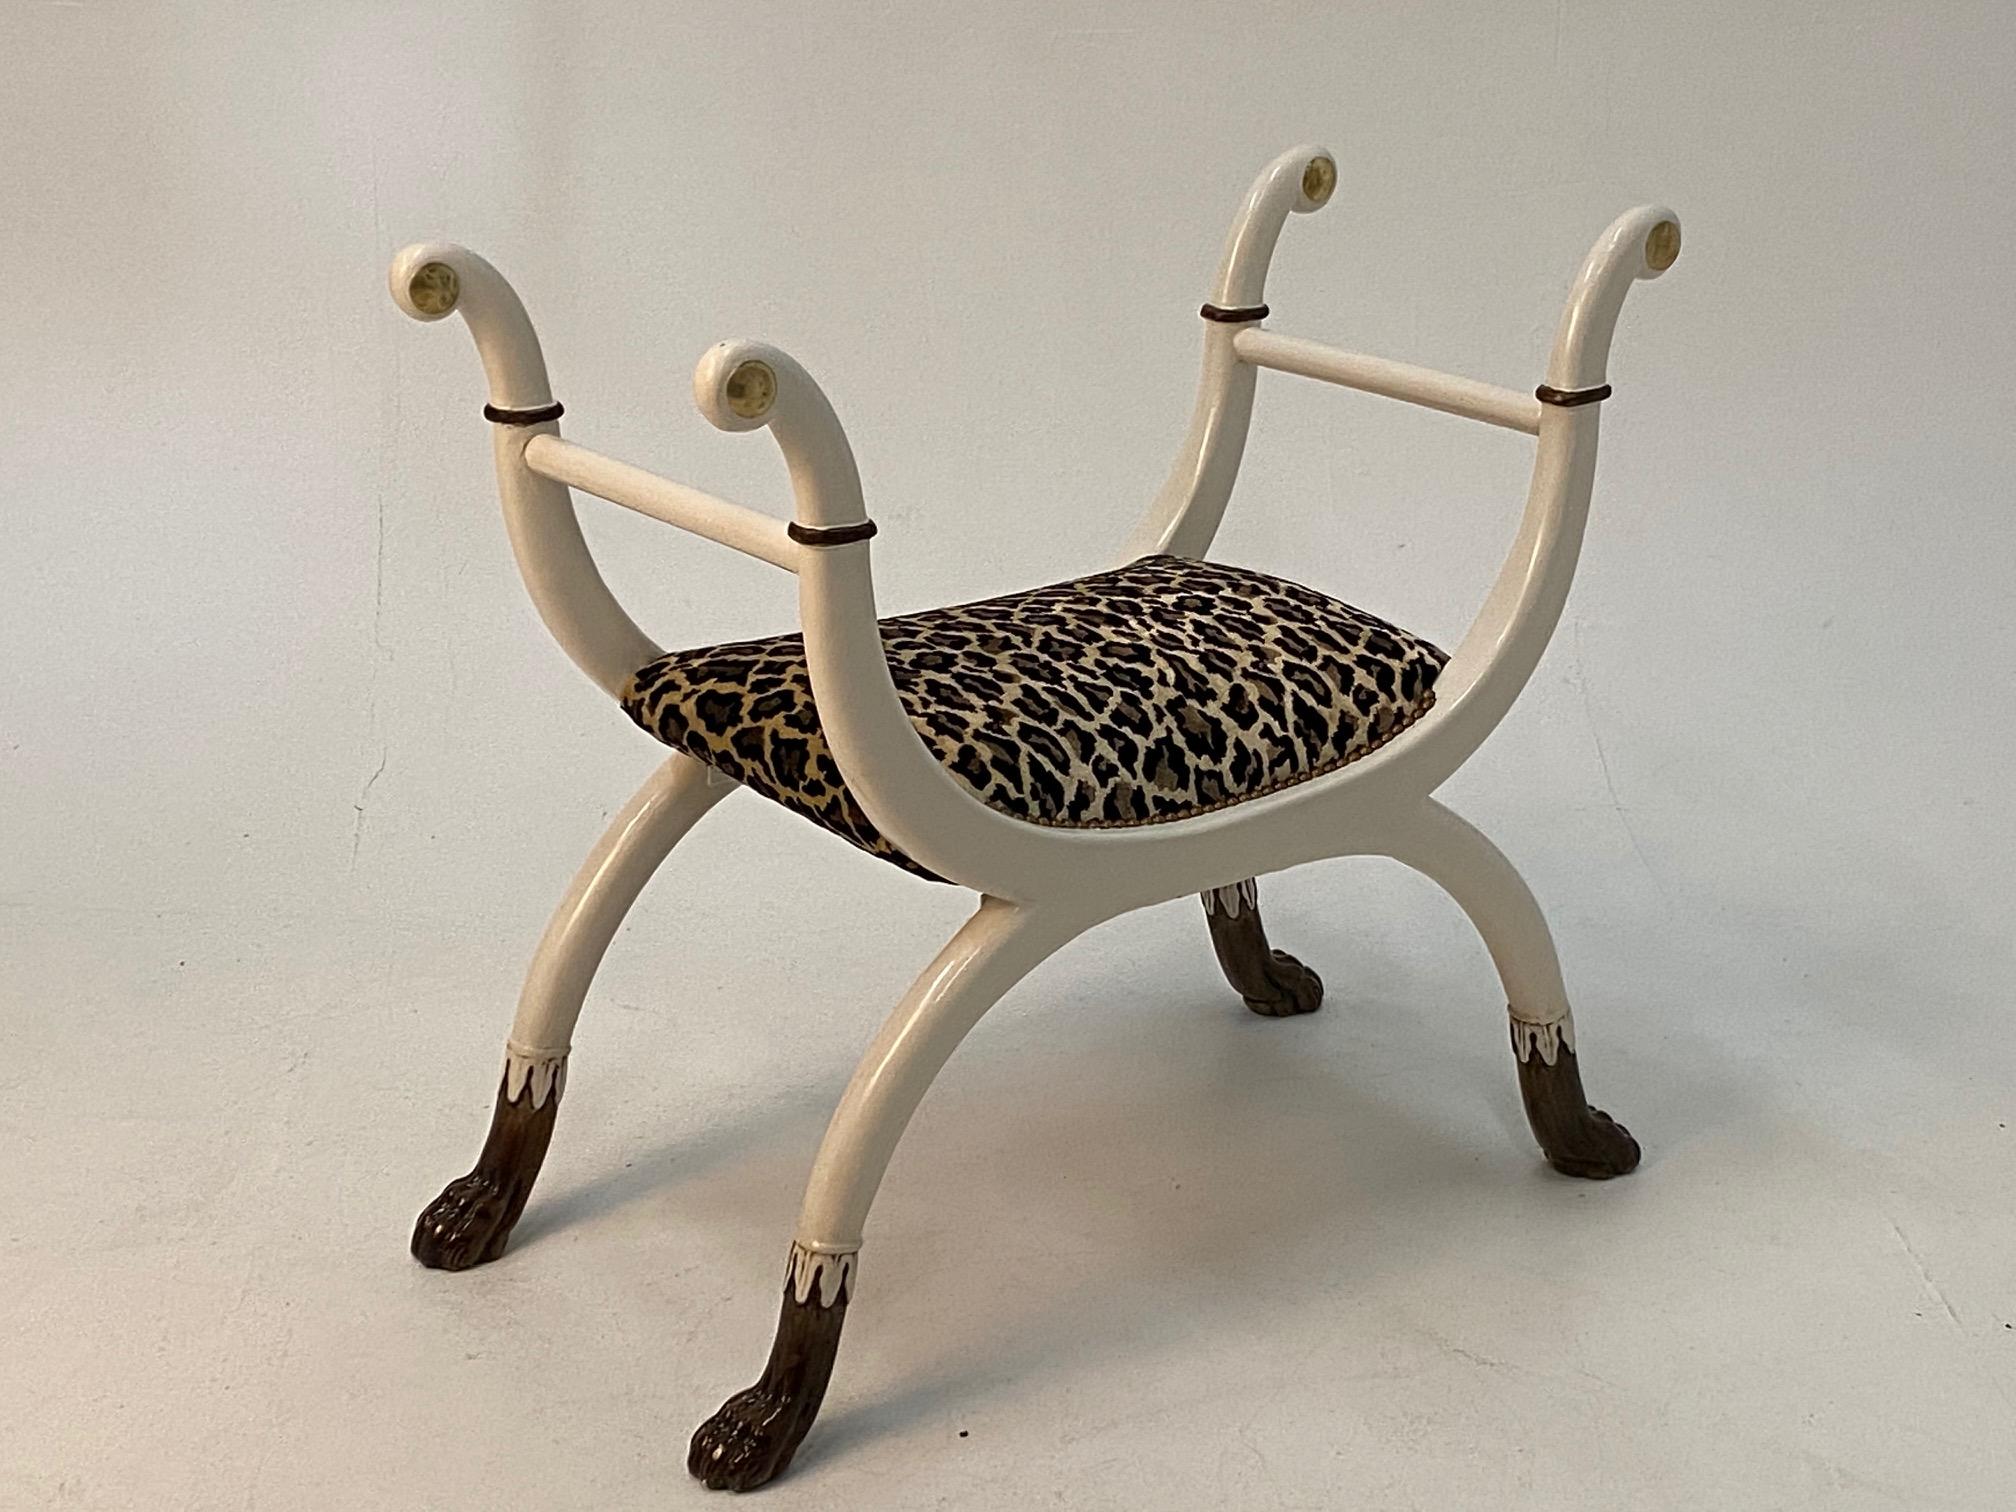 Super chic Regency style bench having white lacquer wood with black and brass accents and sensual curvy shape. Seat is newly upholstered in complimentary faux leopard fabric and the legs terminate in wonderful black lacquer paw feet.